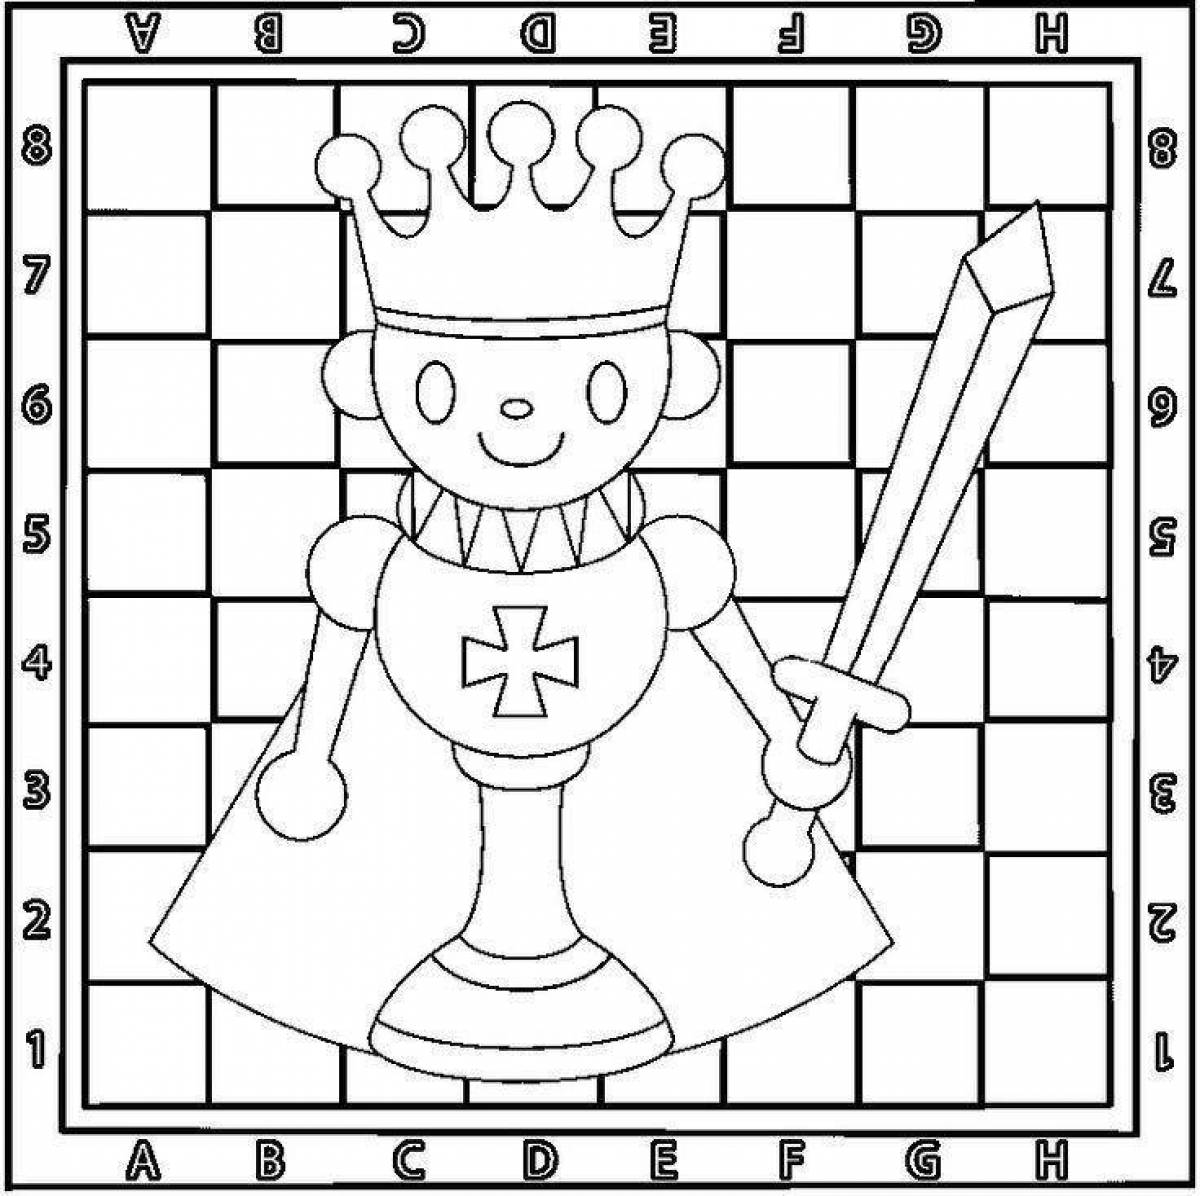 Exquisite chess coloring book